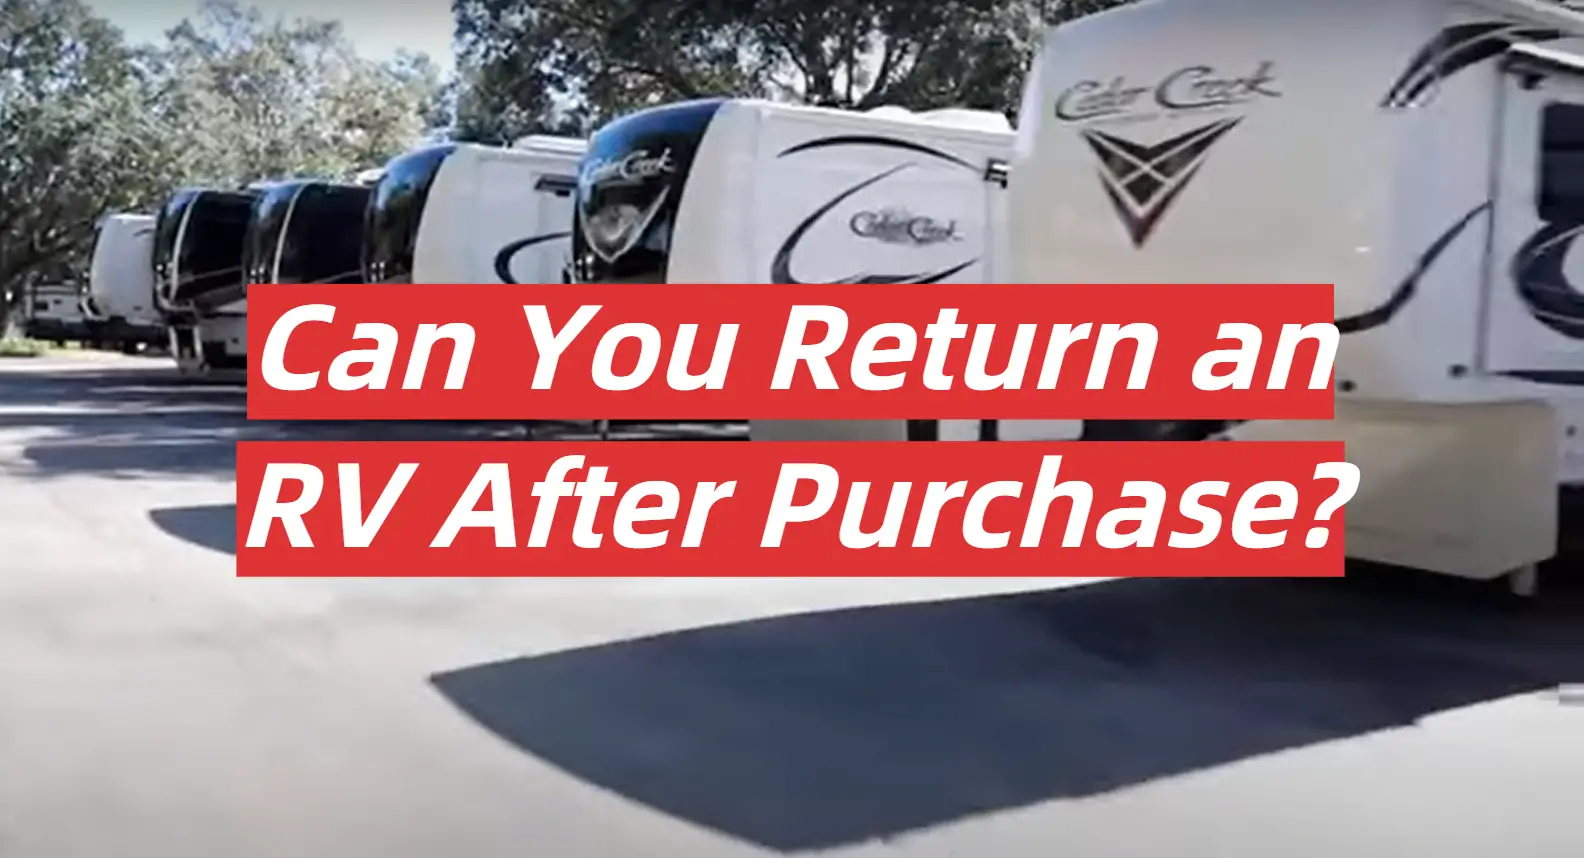 Can You Return an RV After Purchase?